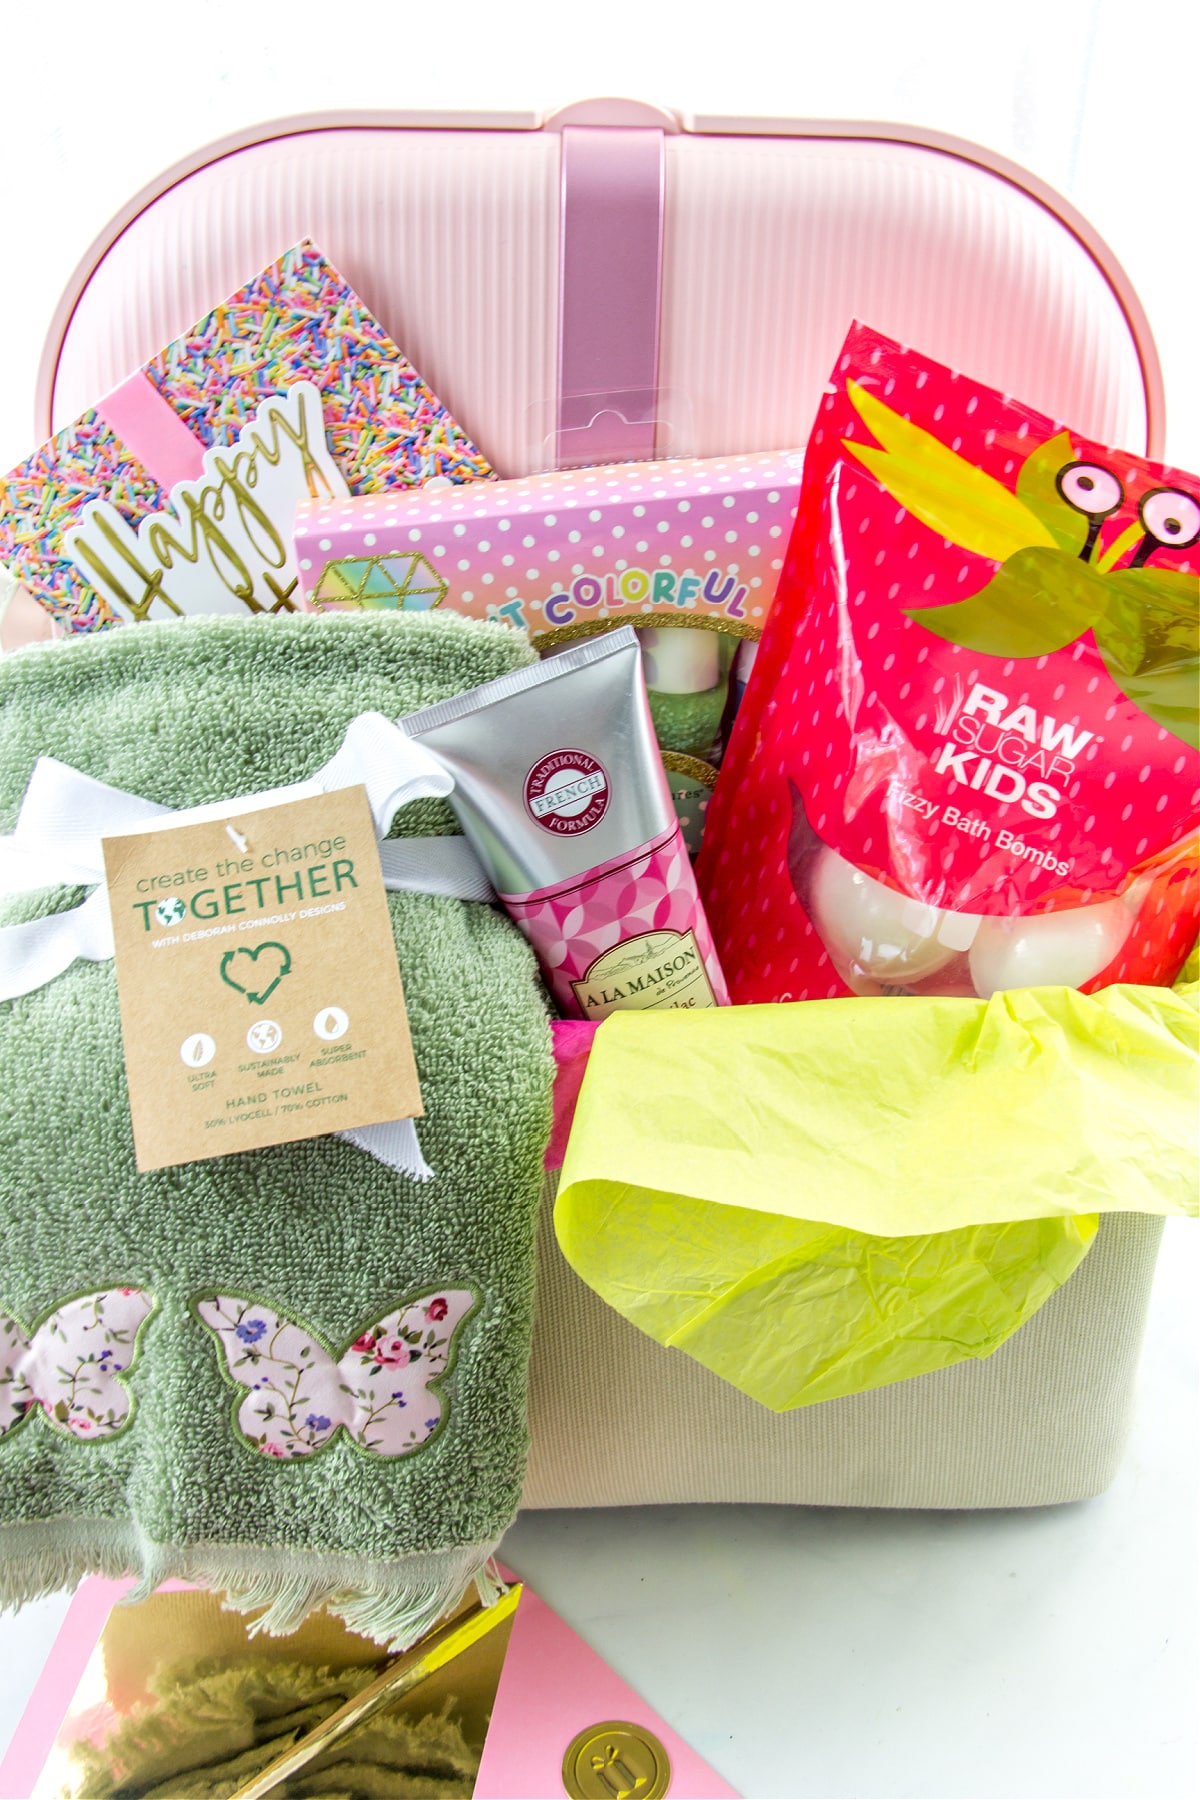 a foot spa gift basket for little girls including a collapsible foot spa, bath bombs, lotion, nail polish, and towels.